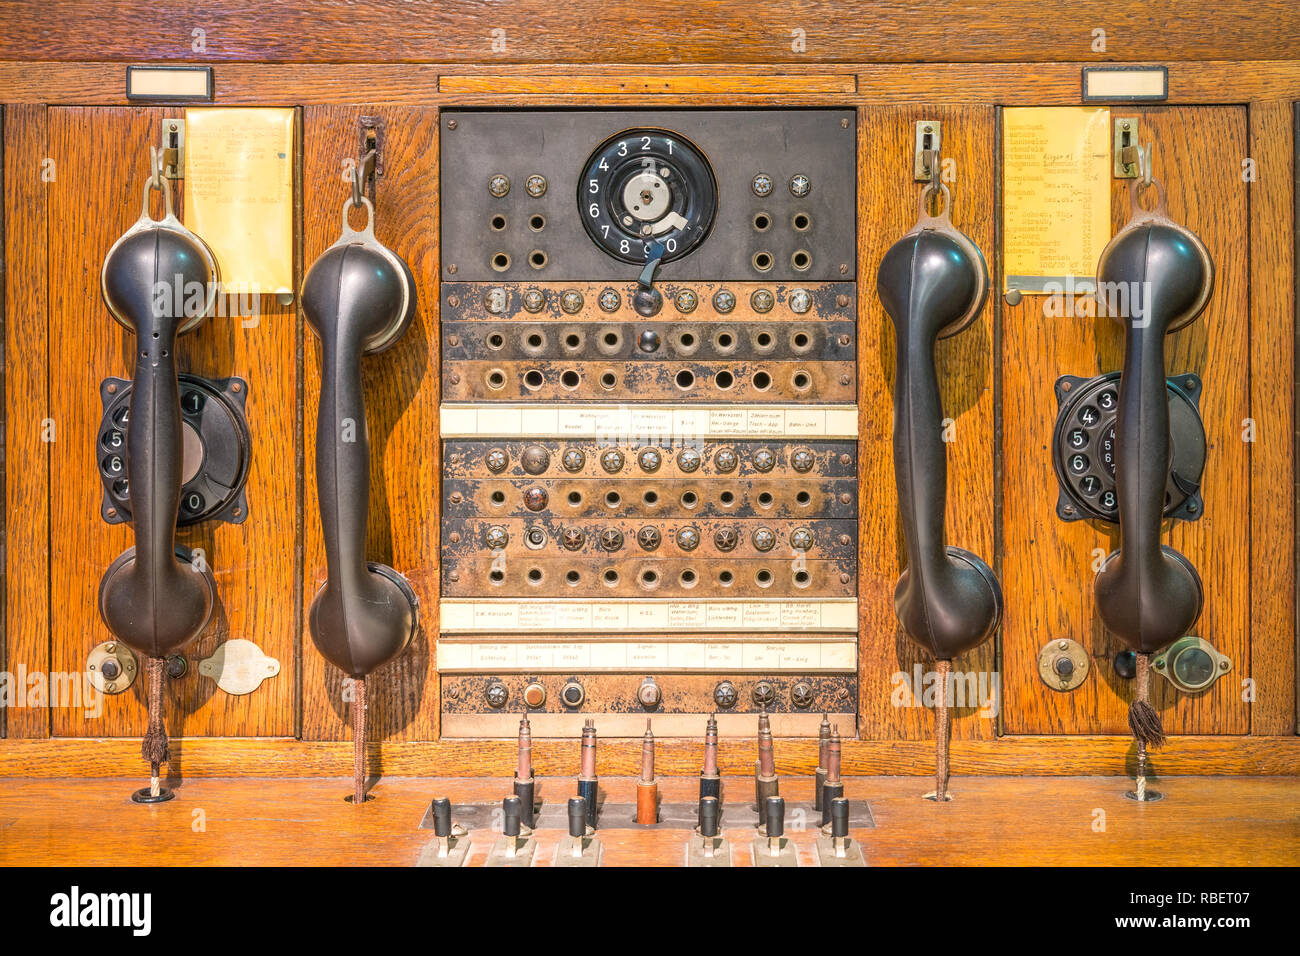 Old telephone system Stock Photo